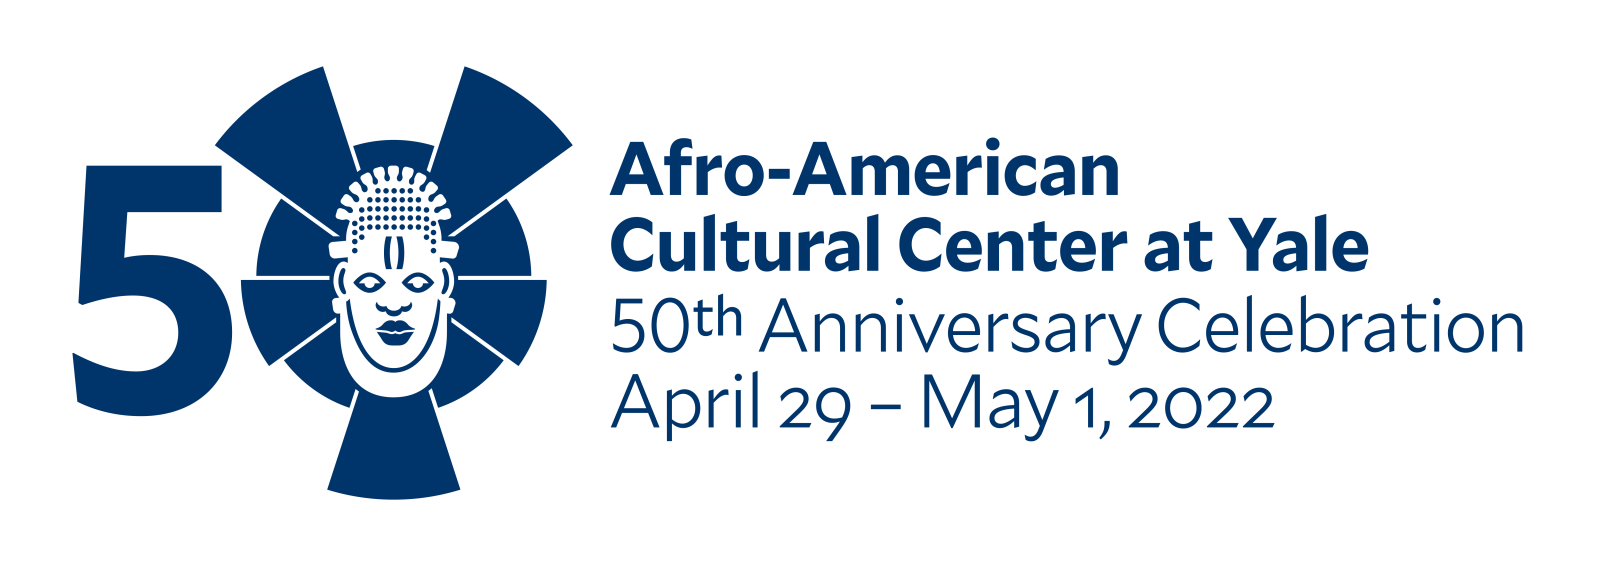 AFAM 50th Anniversary Celebration, April 29 through May 1 2022